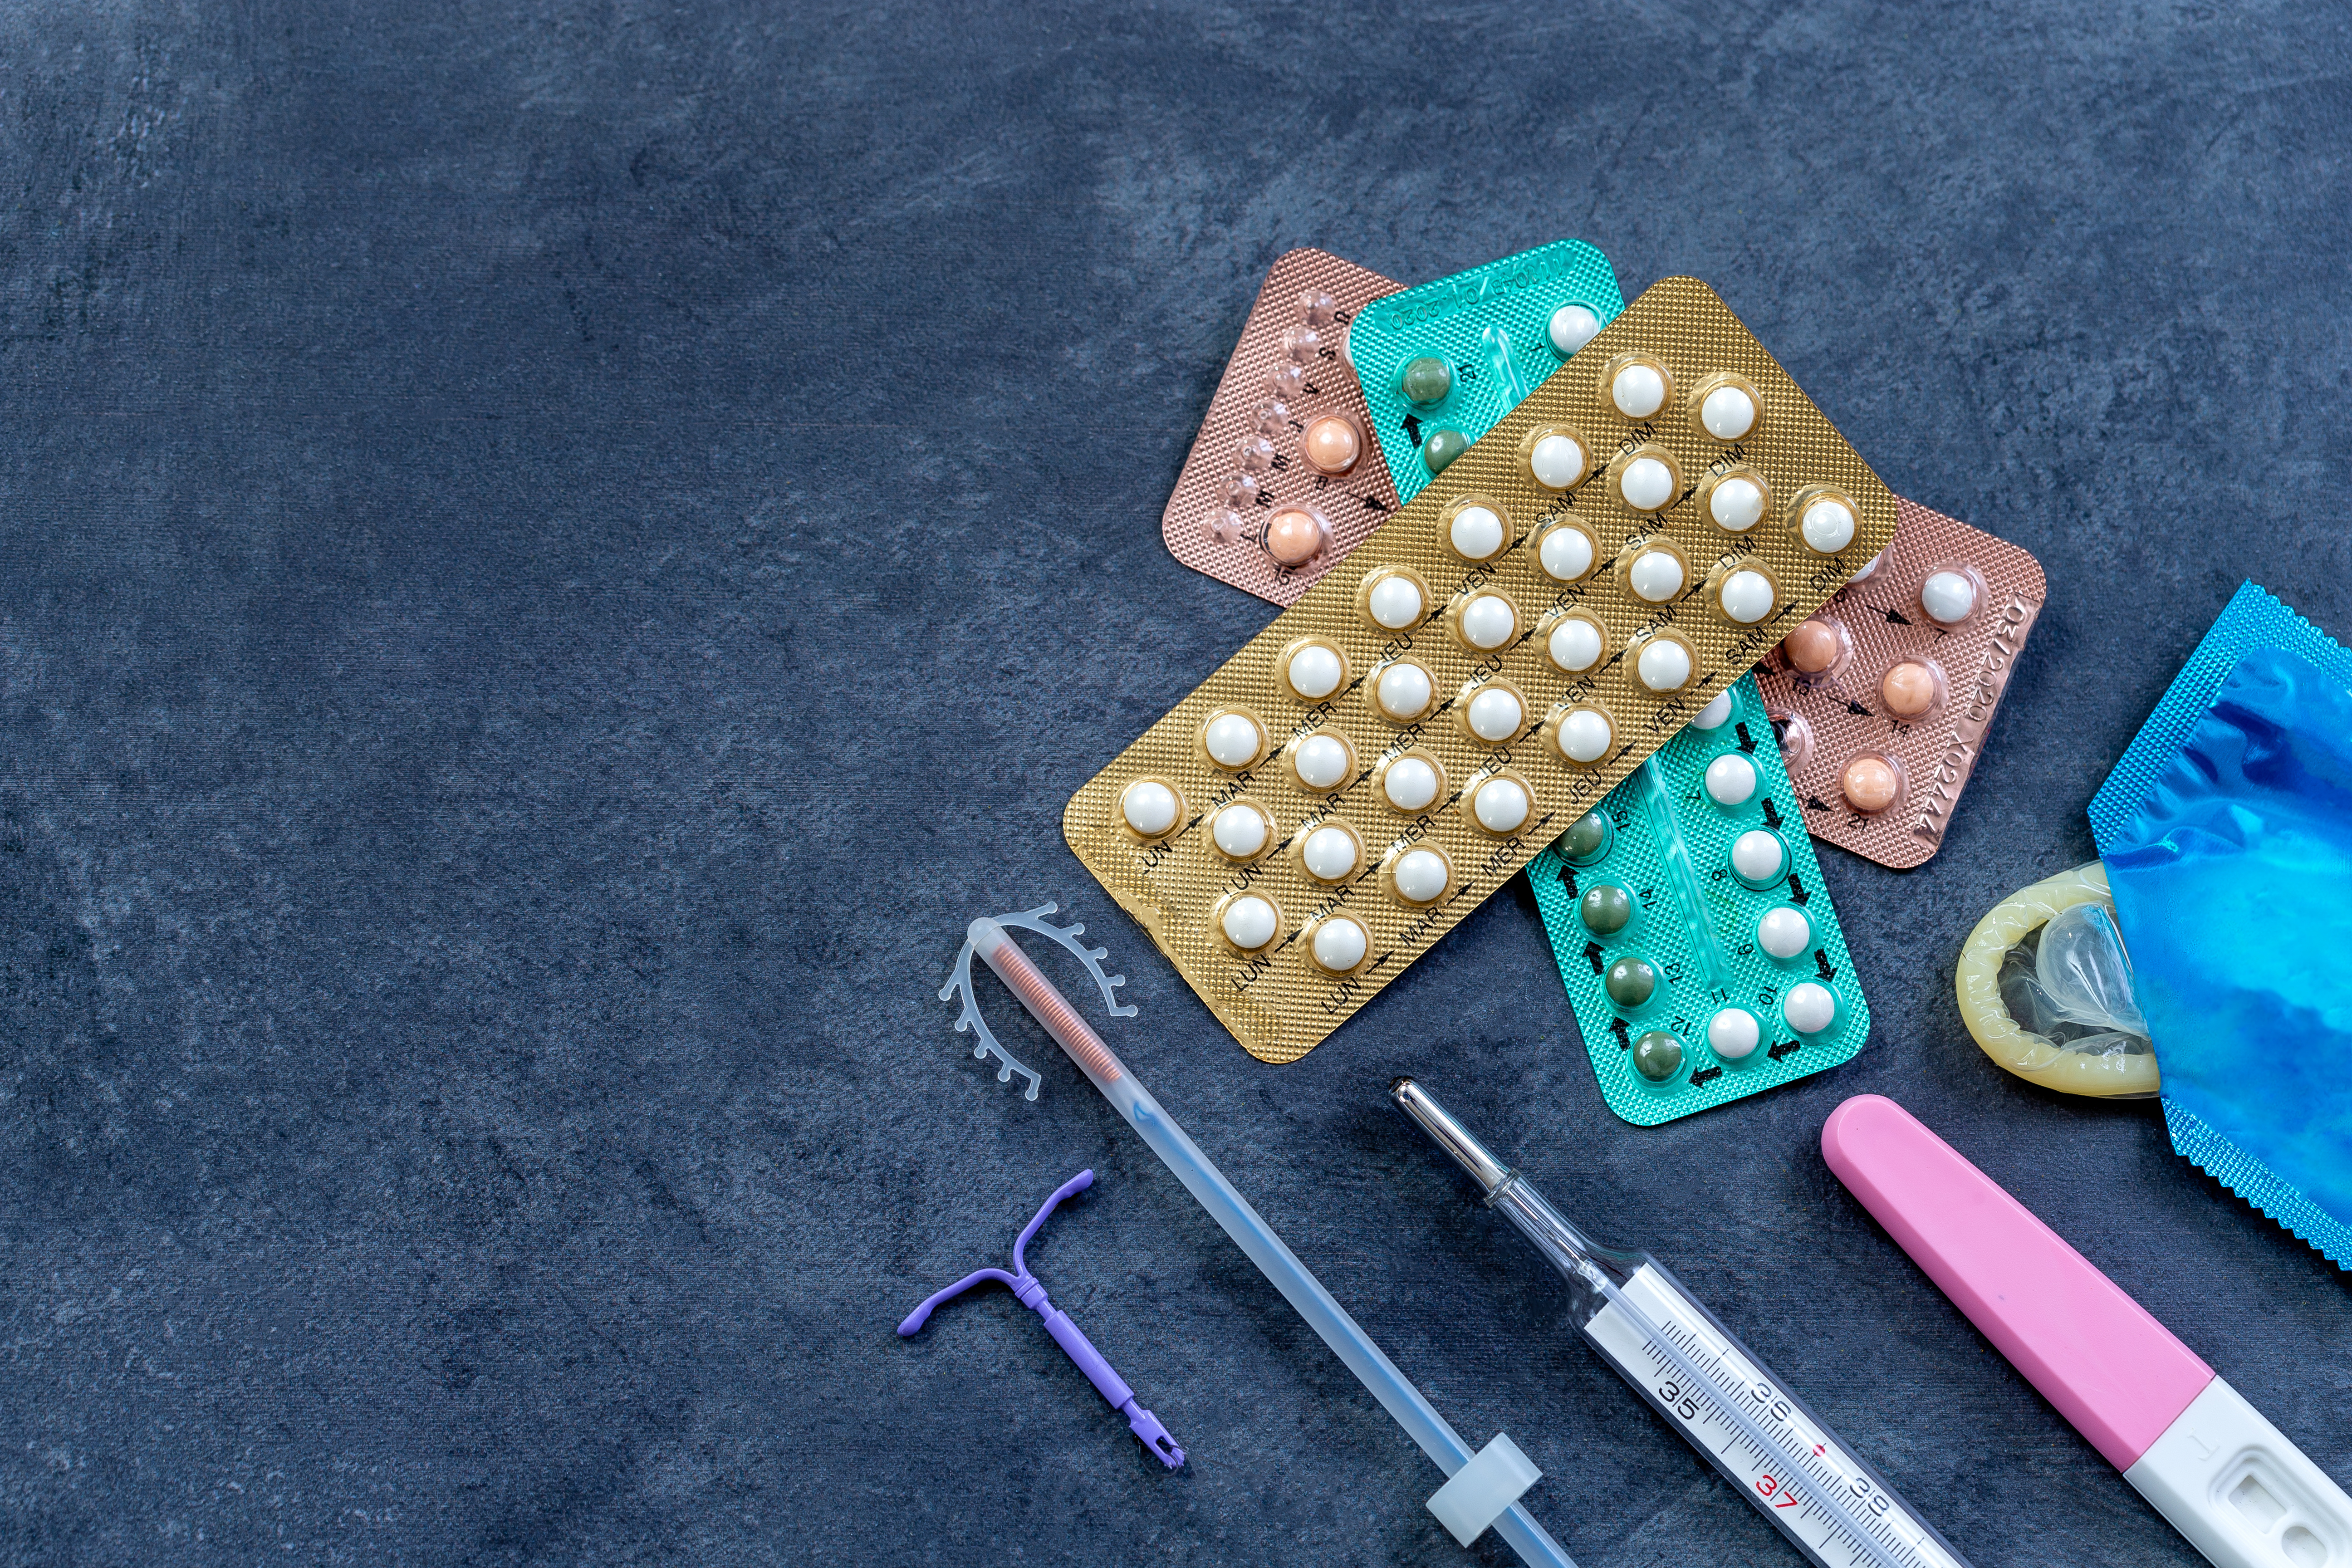 Access to Long-Acting Reversible Contraception Increasing with Medicaid Expansion